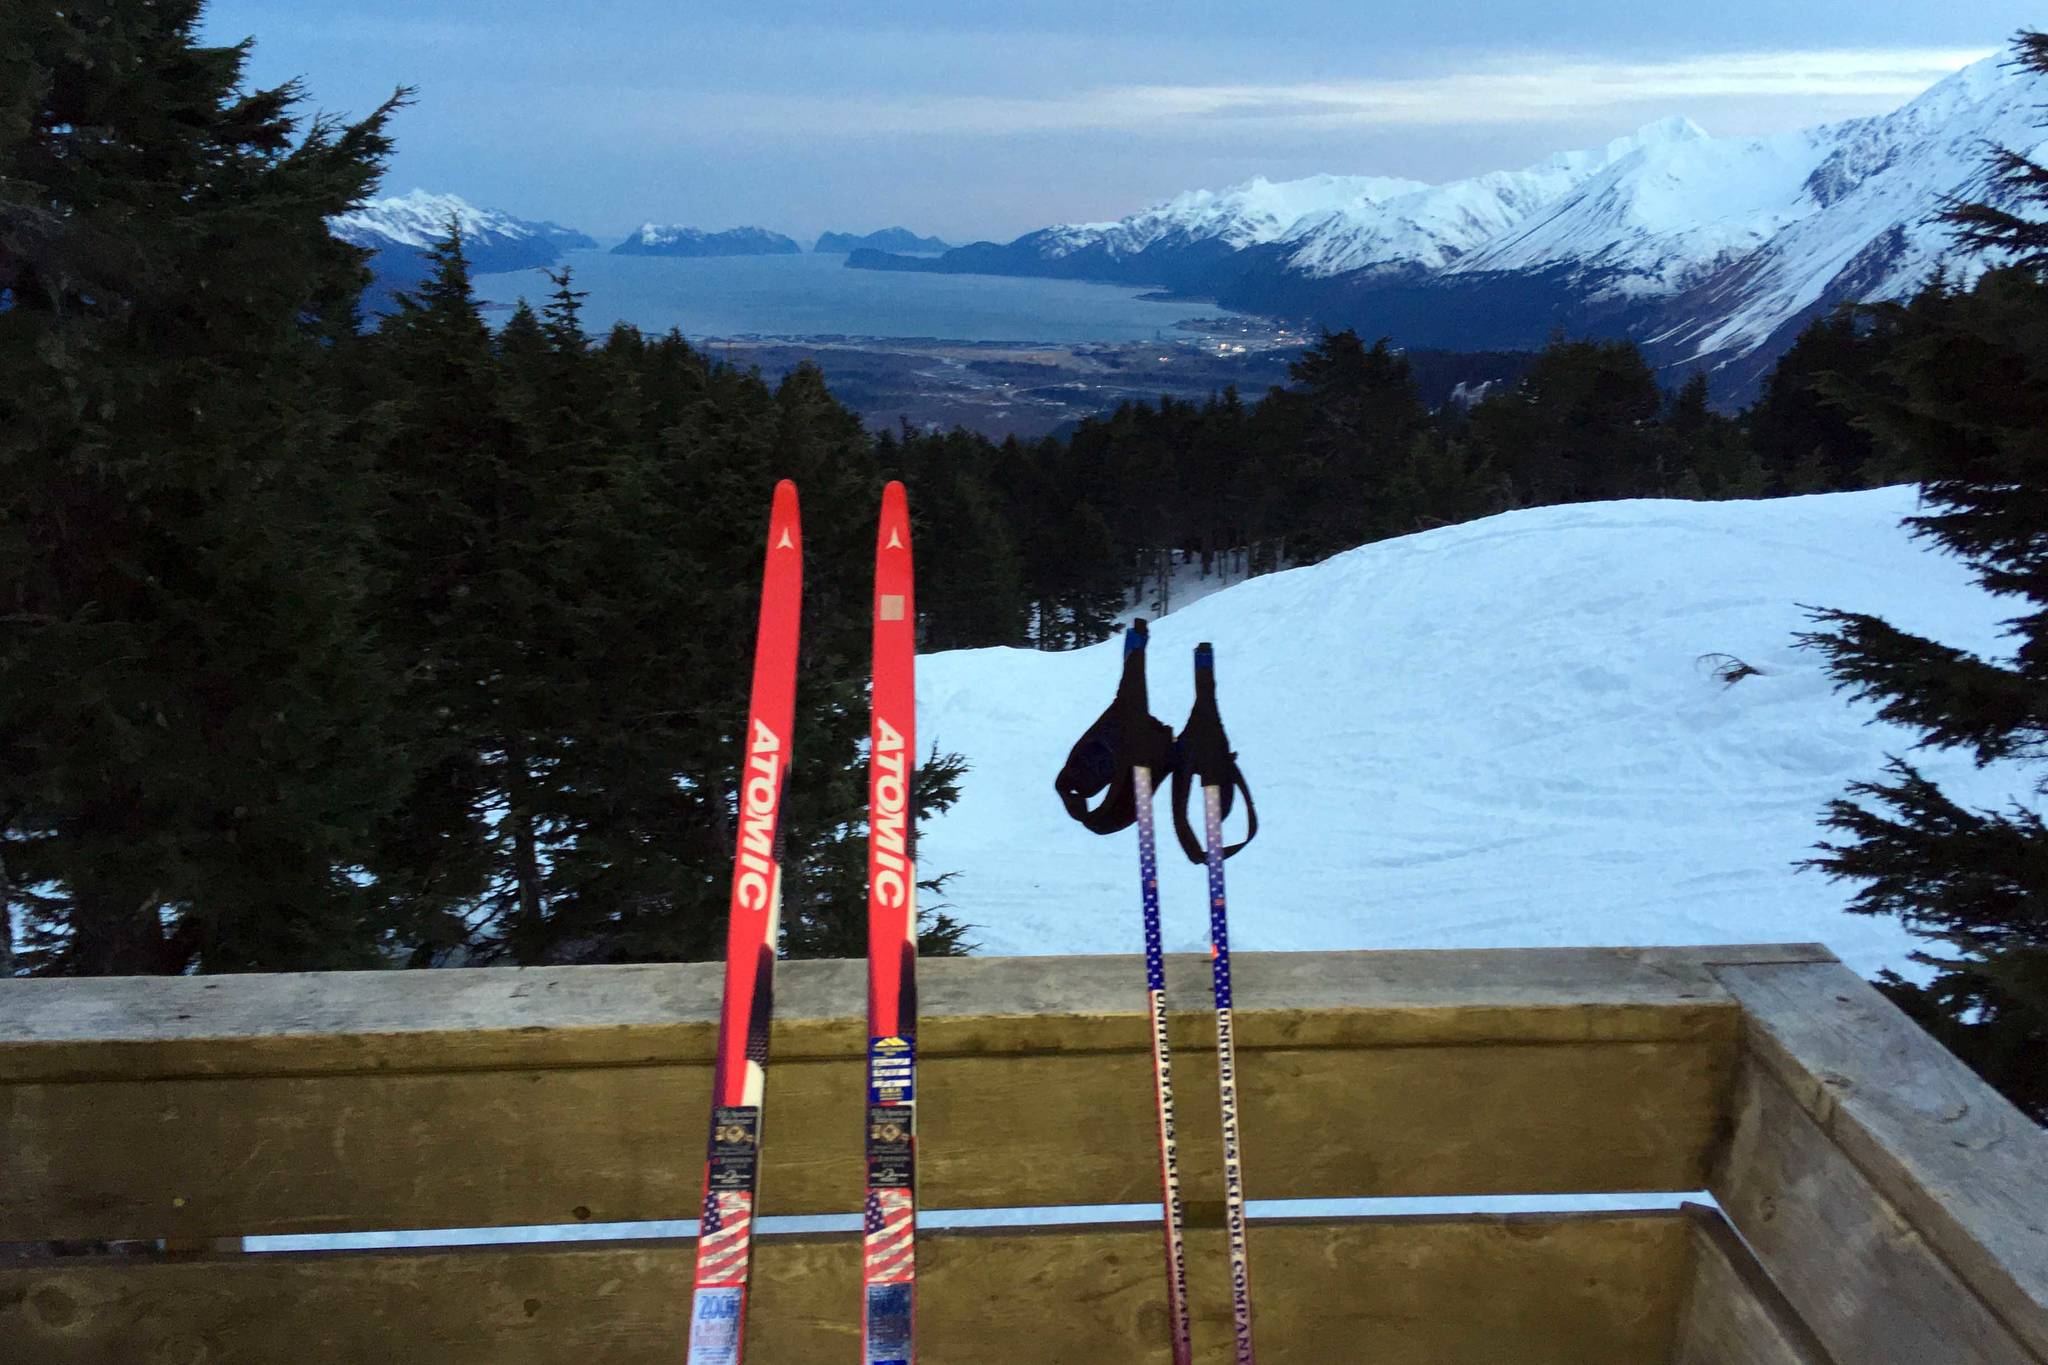 Skis and poles, ready for crust skiing, sit at the Dale Clemens Cabin above Resurrection Bay and Seward on April 12, 2019. (Photo by Jeff Helminiak/Peninsula Clarion)